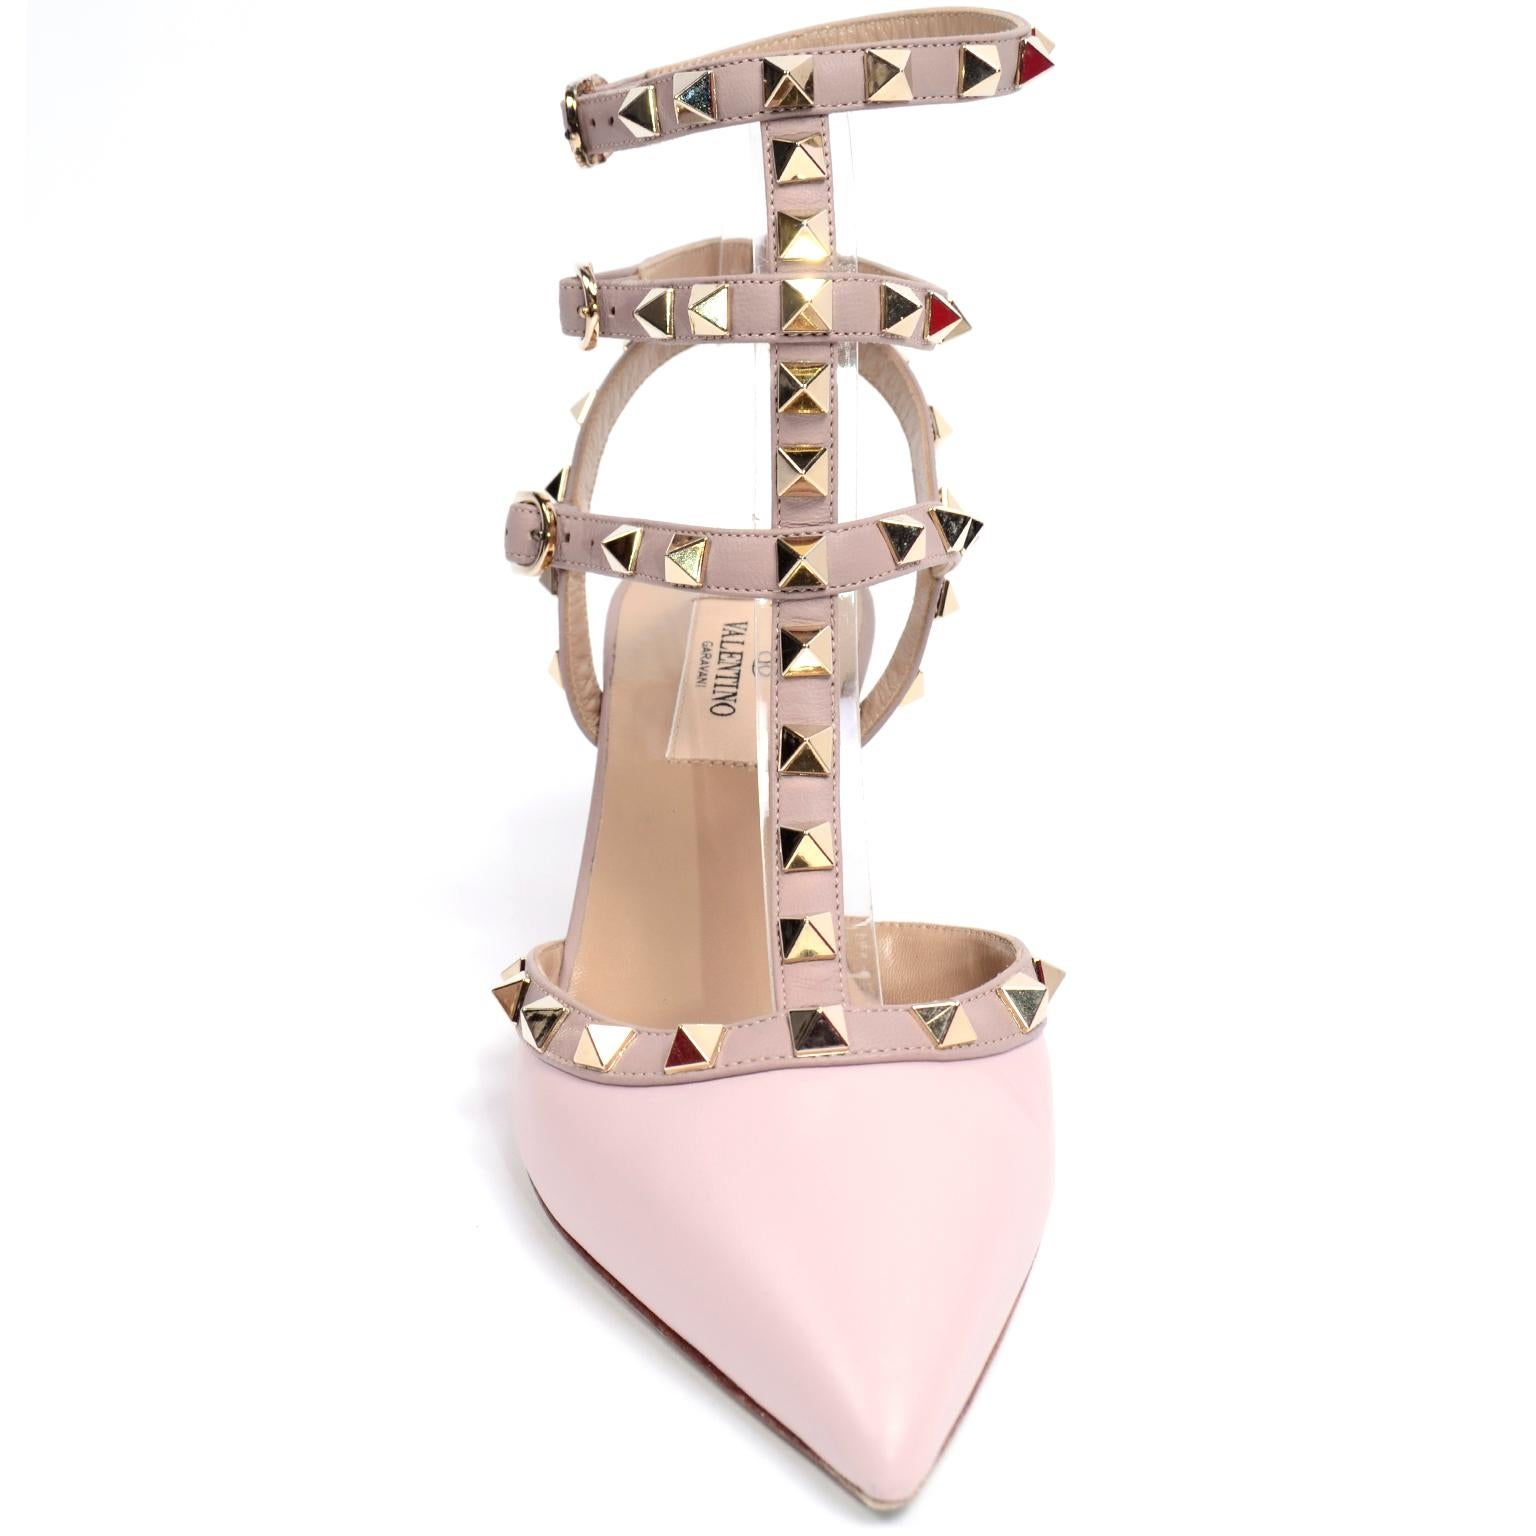 These gorgeous Valentino rockstud shoes are in a lovely pink and beige leather and feature side buckle fastenings, a pointed toe, a branded insole and low heel. The gold-tone Rockstud embellishments are a Valentino signature that toughen up an